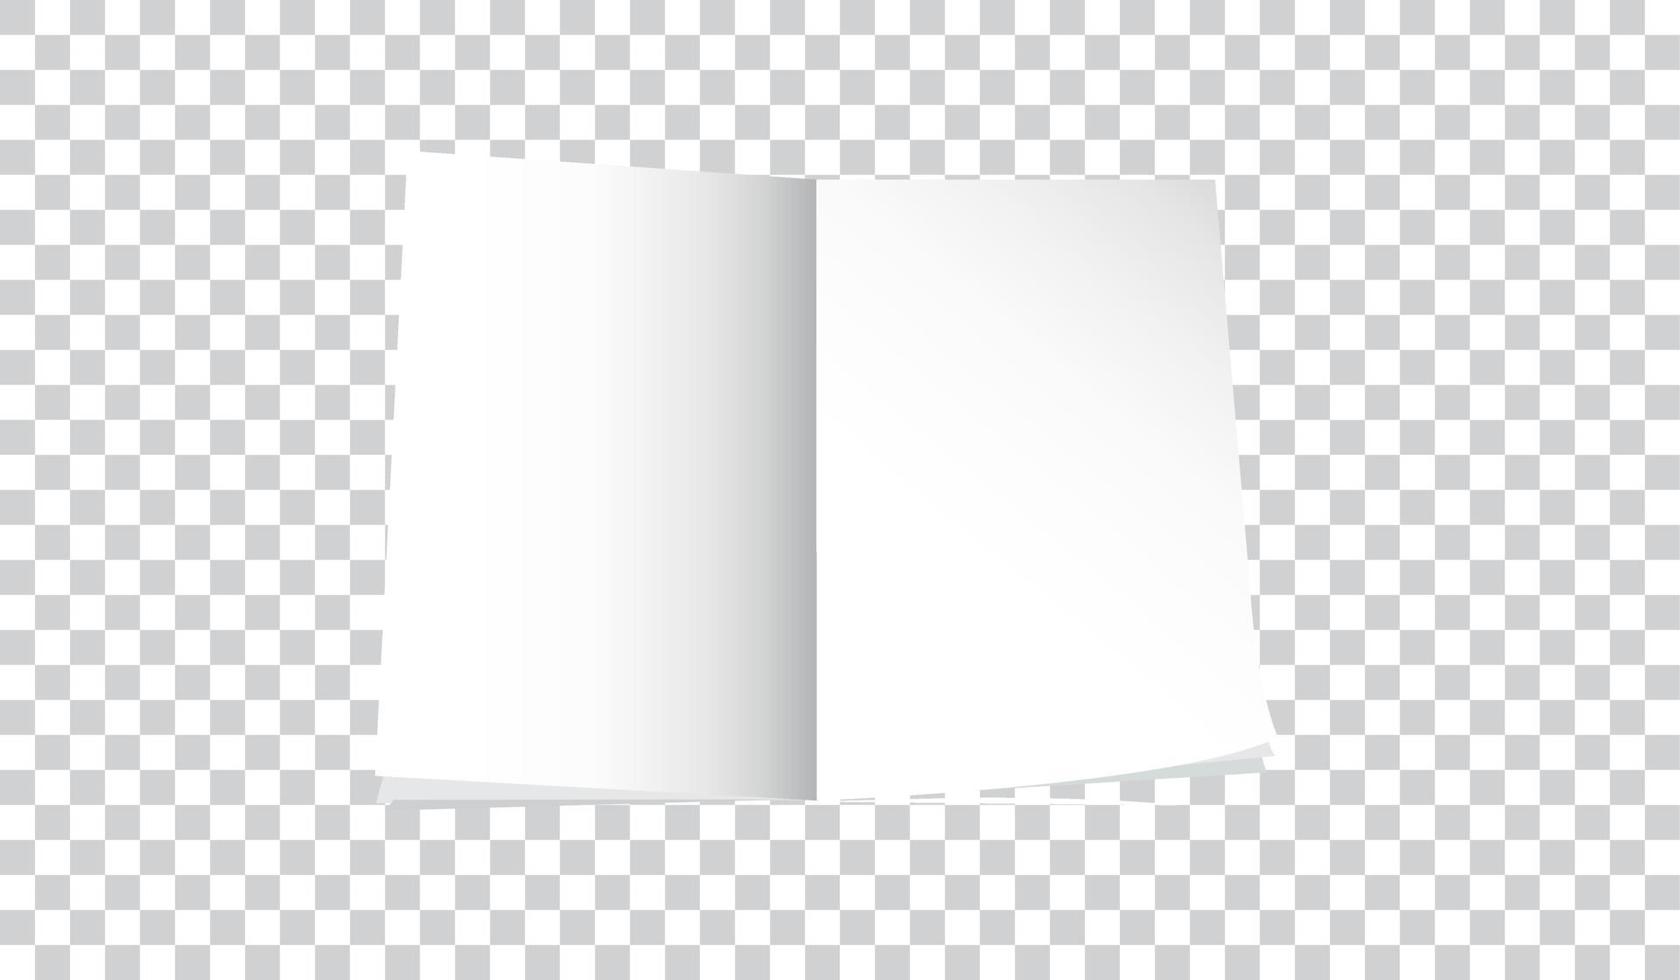 Blank opened book, magazine and notebook template with soft shadows on background. Front view vector